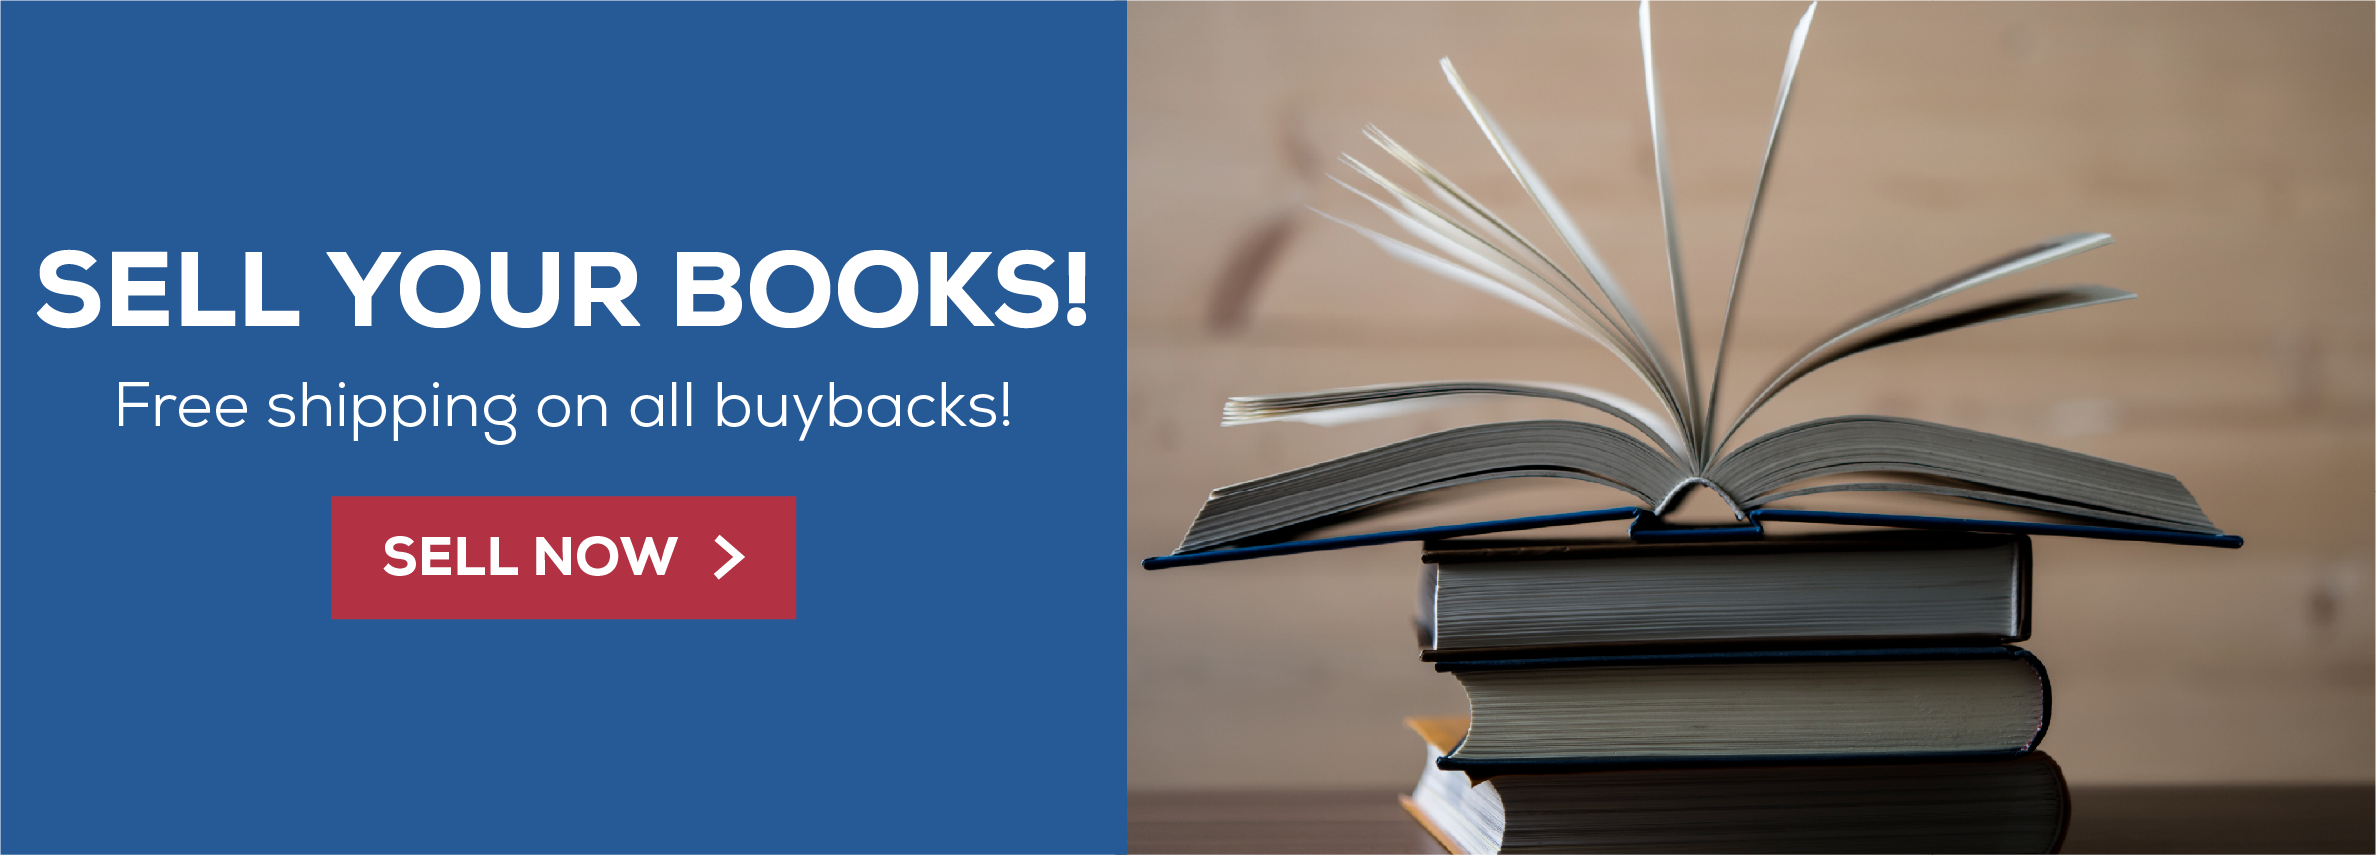 Sell your books! Free shipping on all buybacks. Sell now